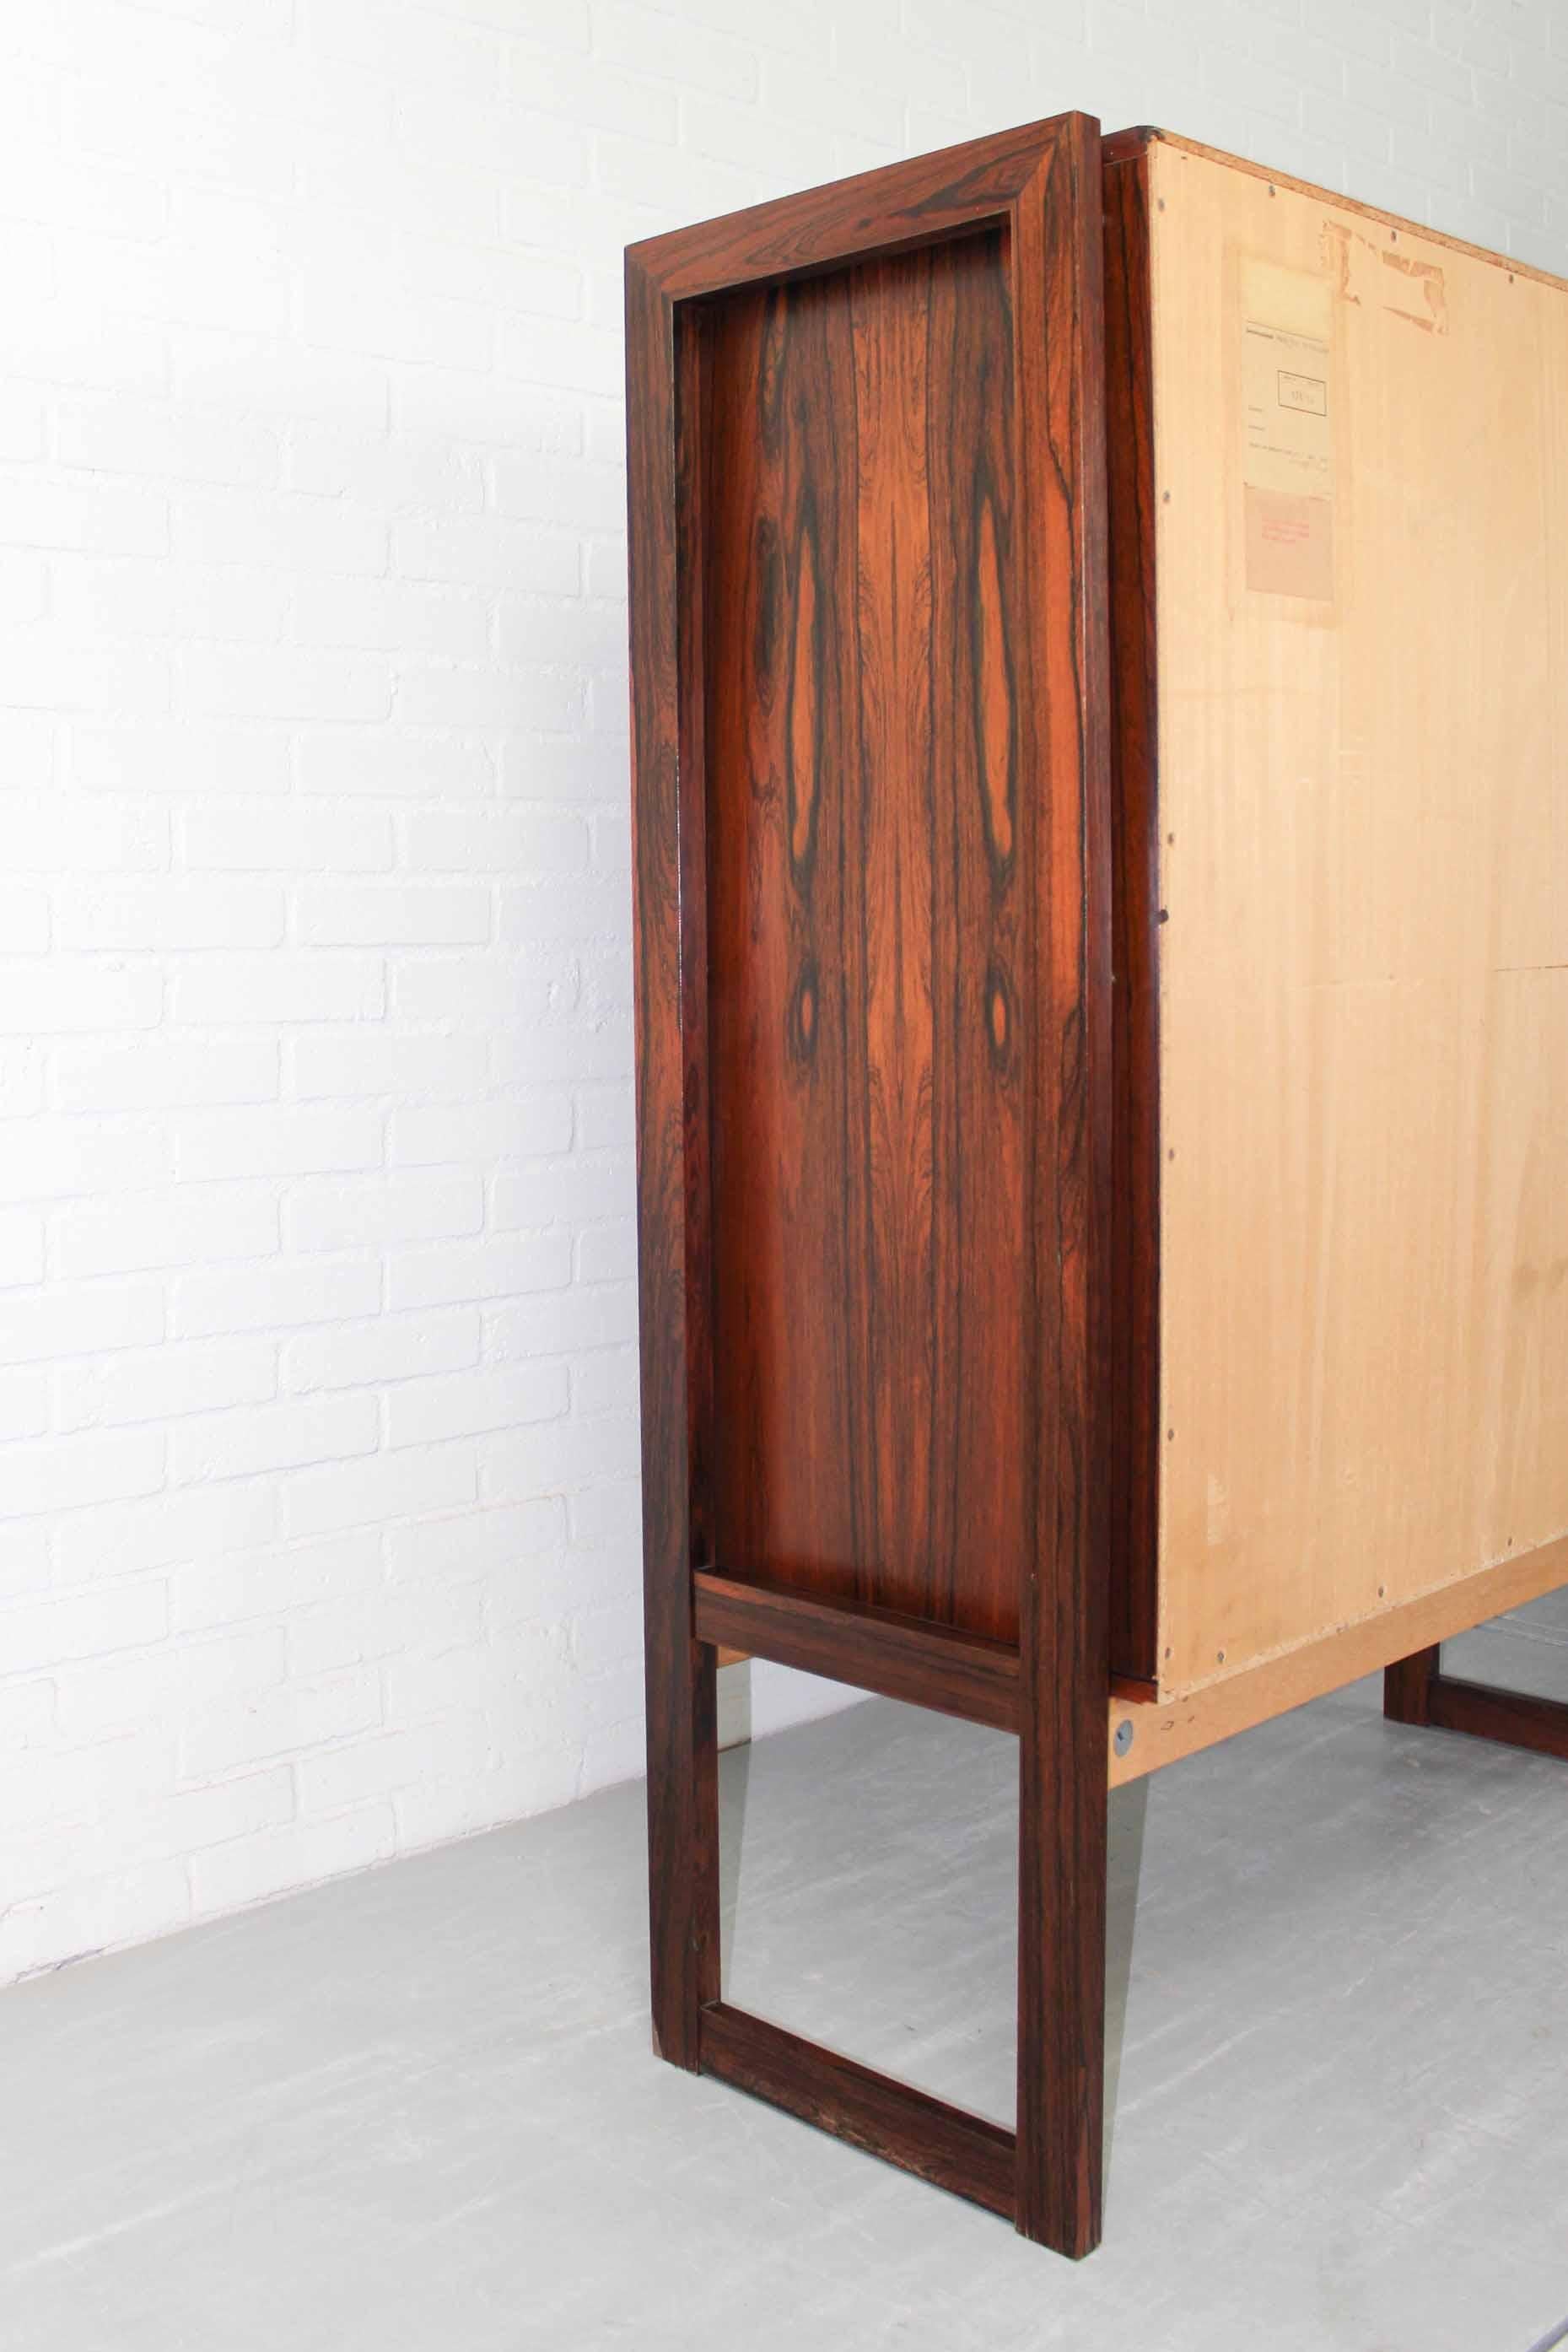 Highboard “Malmo” Within Wood Frame, Executed in Rio Palissander, 1960s 2